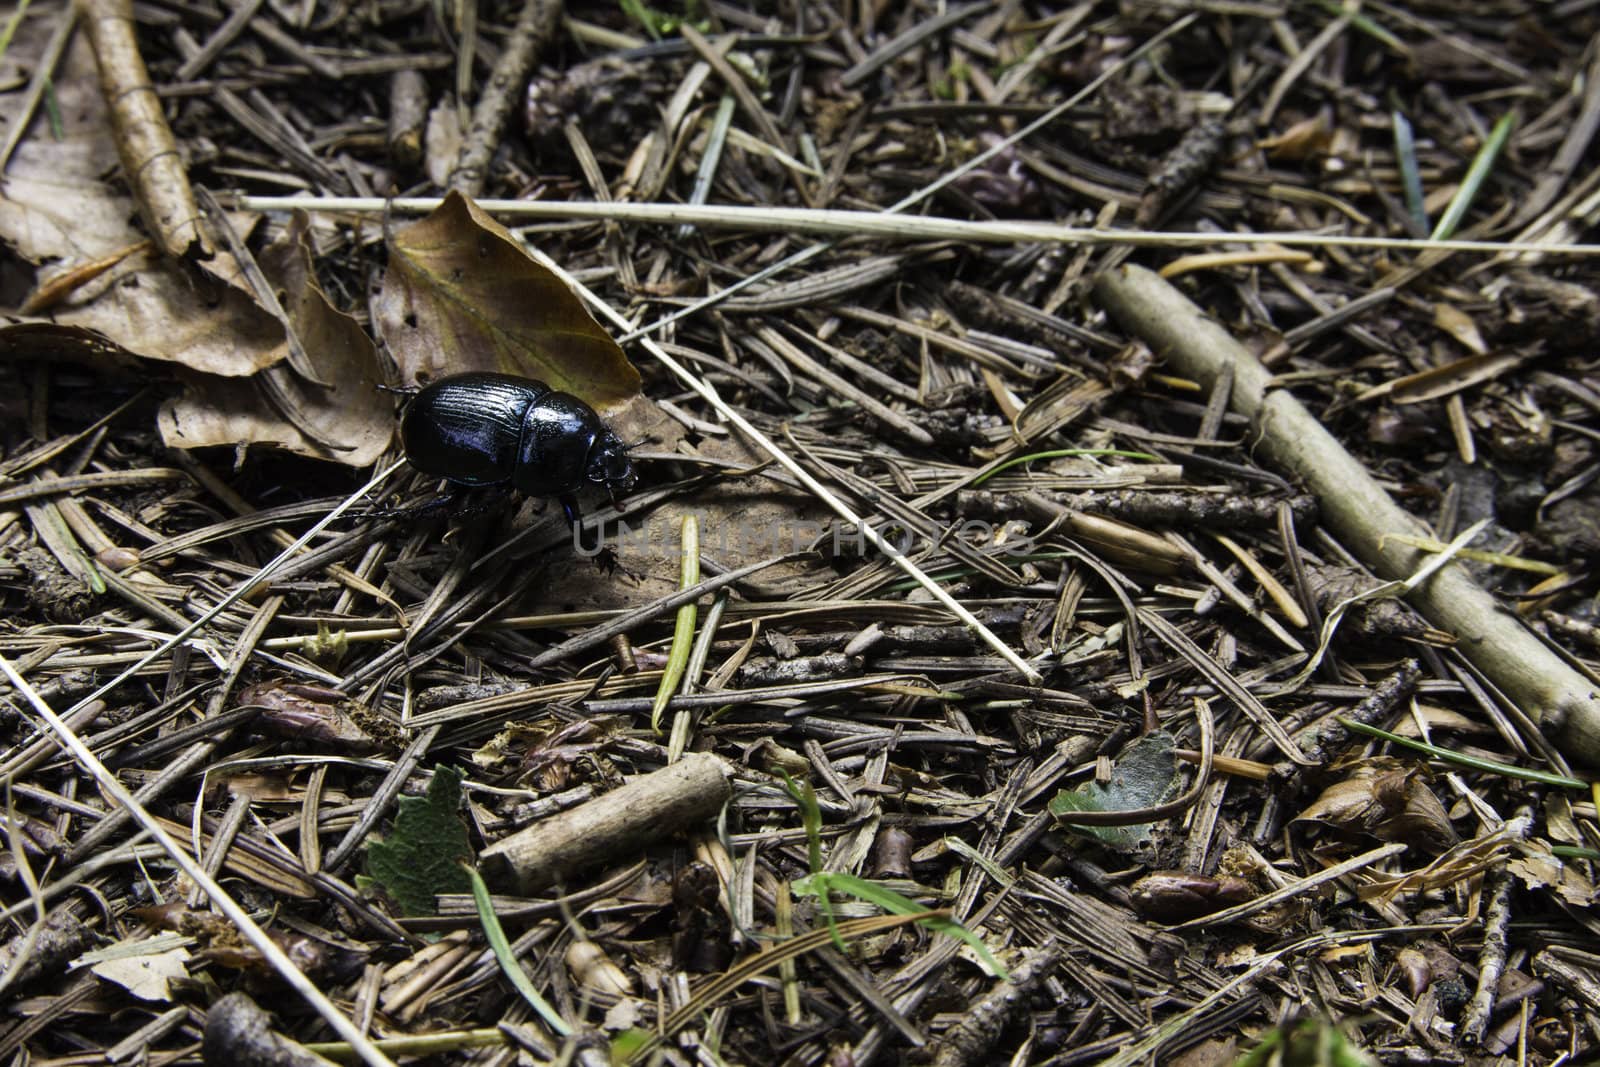 Black beetle with the typical modified forewings of the Colyoptera forming a protective horny coating over the underlying membranous wing,s on forest floor